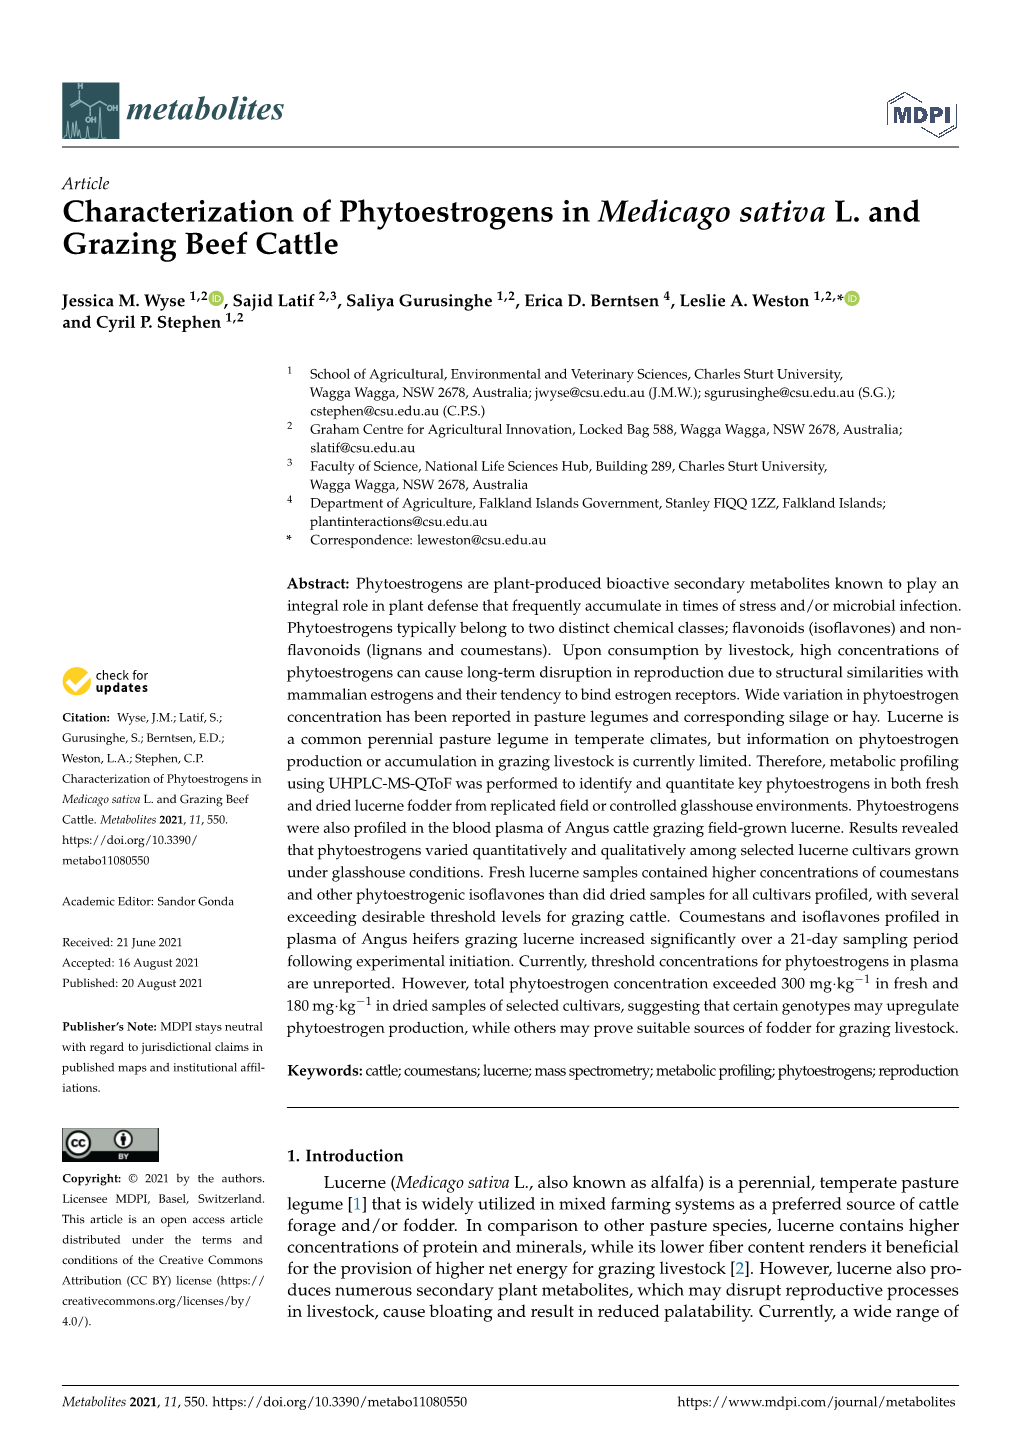 Characterization of Phytoestrogens in Medicago Sativa L. and Grazing Beef Cattle